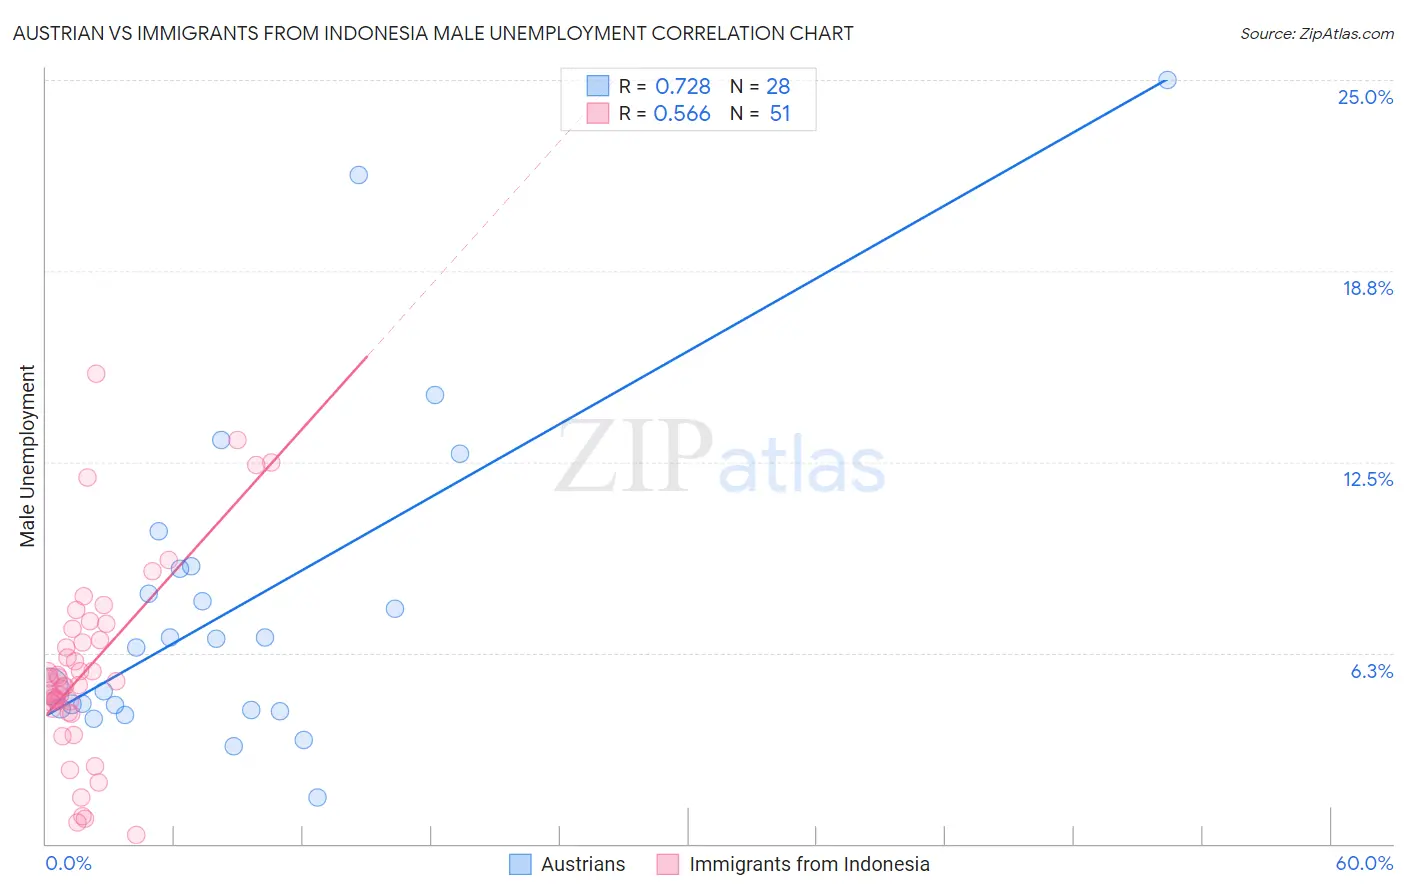 Austrian vs Immigrants from Indonesia Male Unemployment